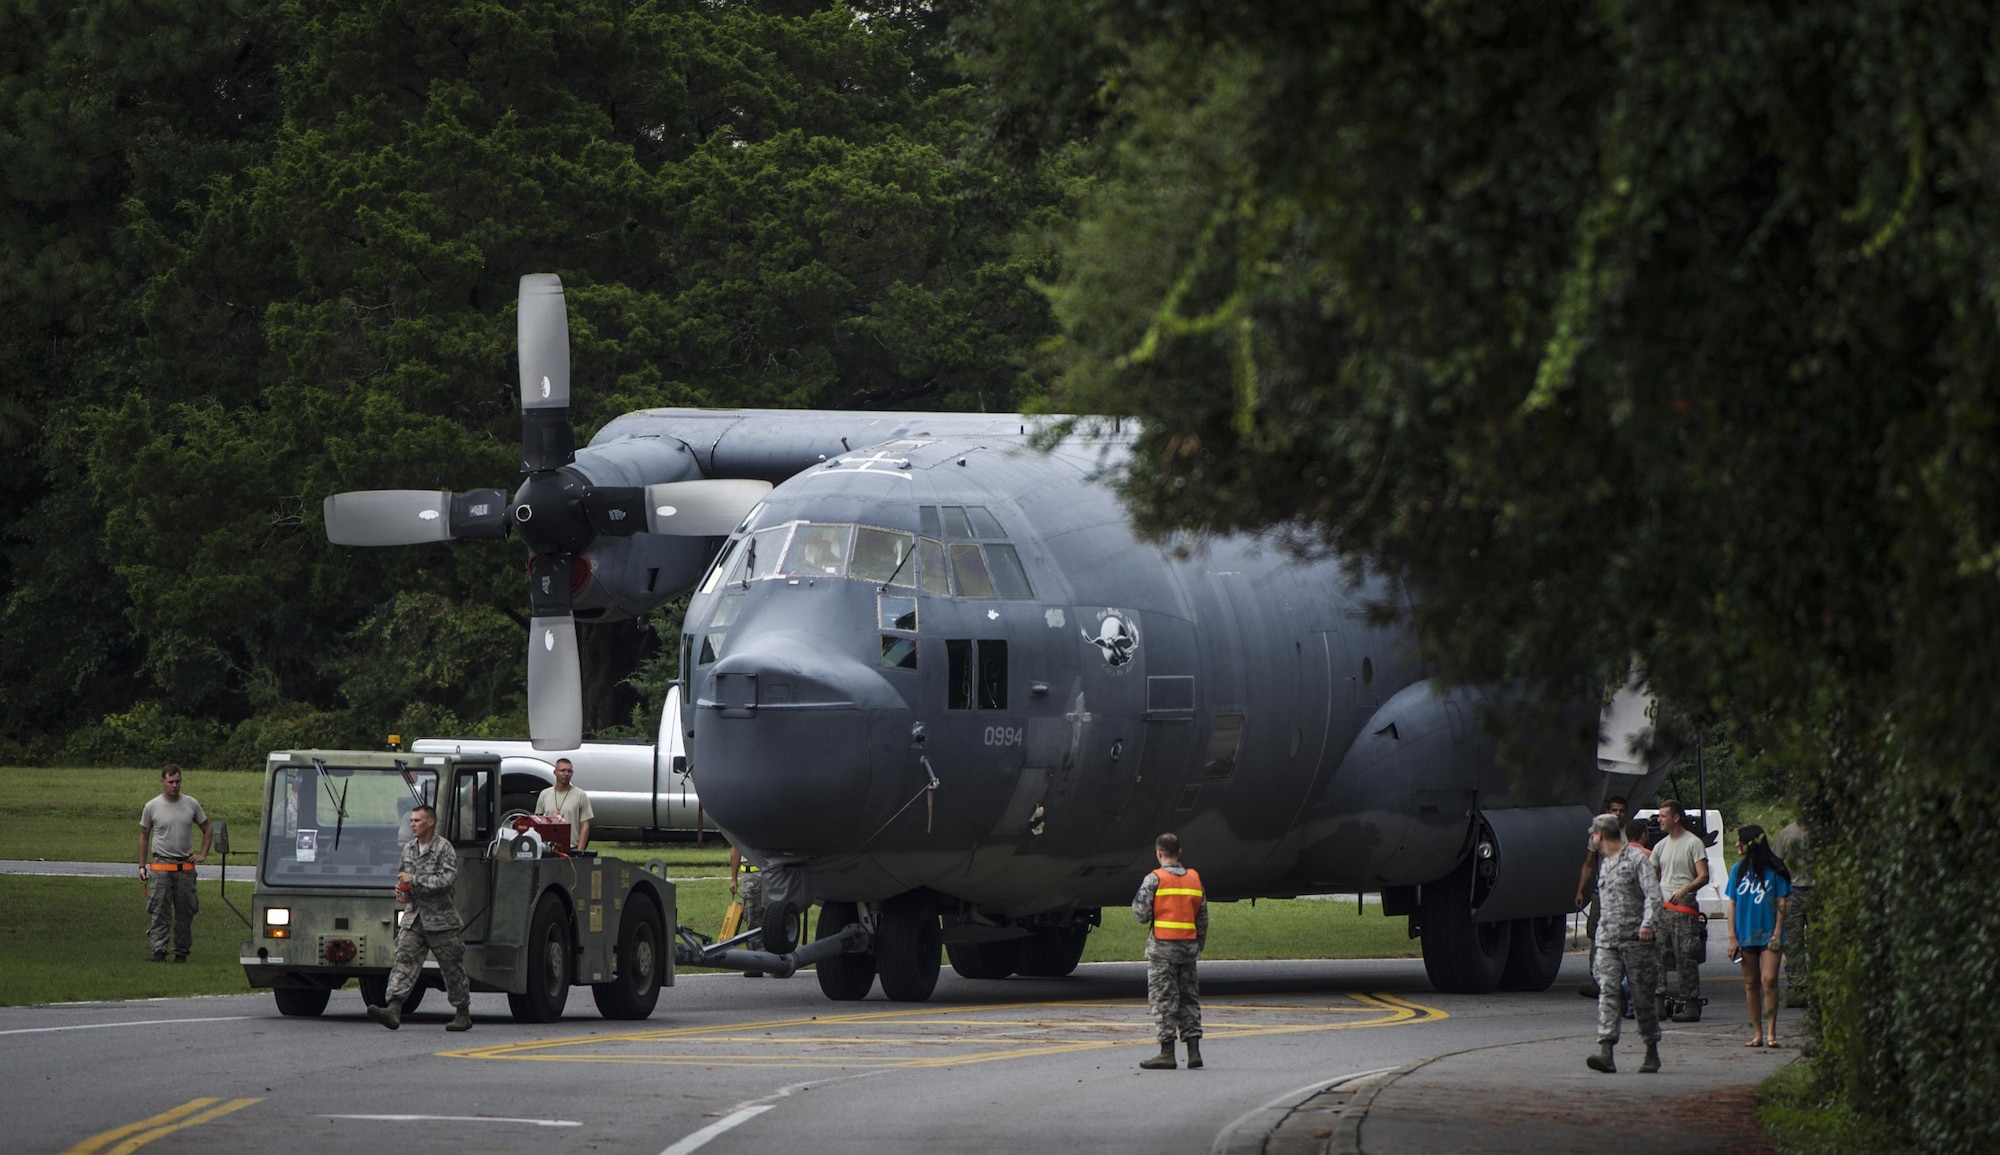 An MC-130P Combat Shadow is towed from the flightline to the Air Park where it will be installed and displayed on Hurlburt Field, Fla., Aug. 15, 2015.  The MC-130P fleet was retired May 15, 2015, after more than 25 years of service. The installation process for this aircraft known as “Team Shadow” is set to be complete by Sep. 6, 2015. (U.S. Air Force photo by Senior Airman Christopher Callaway/released)